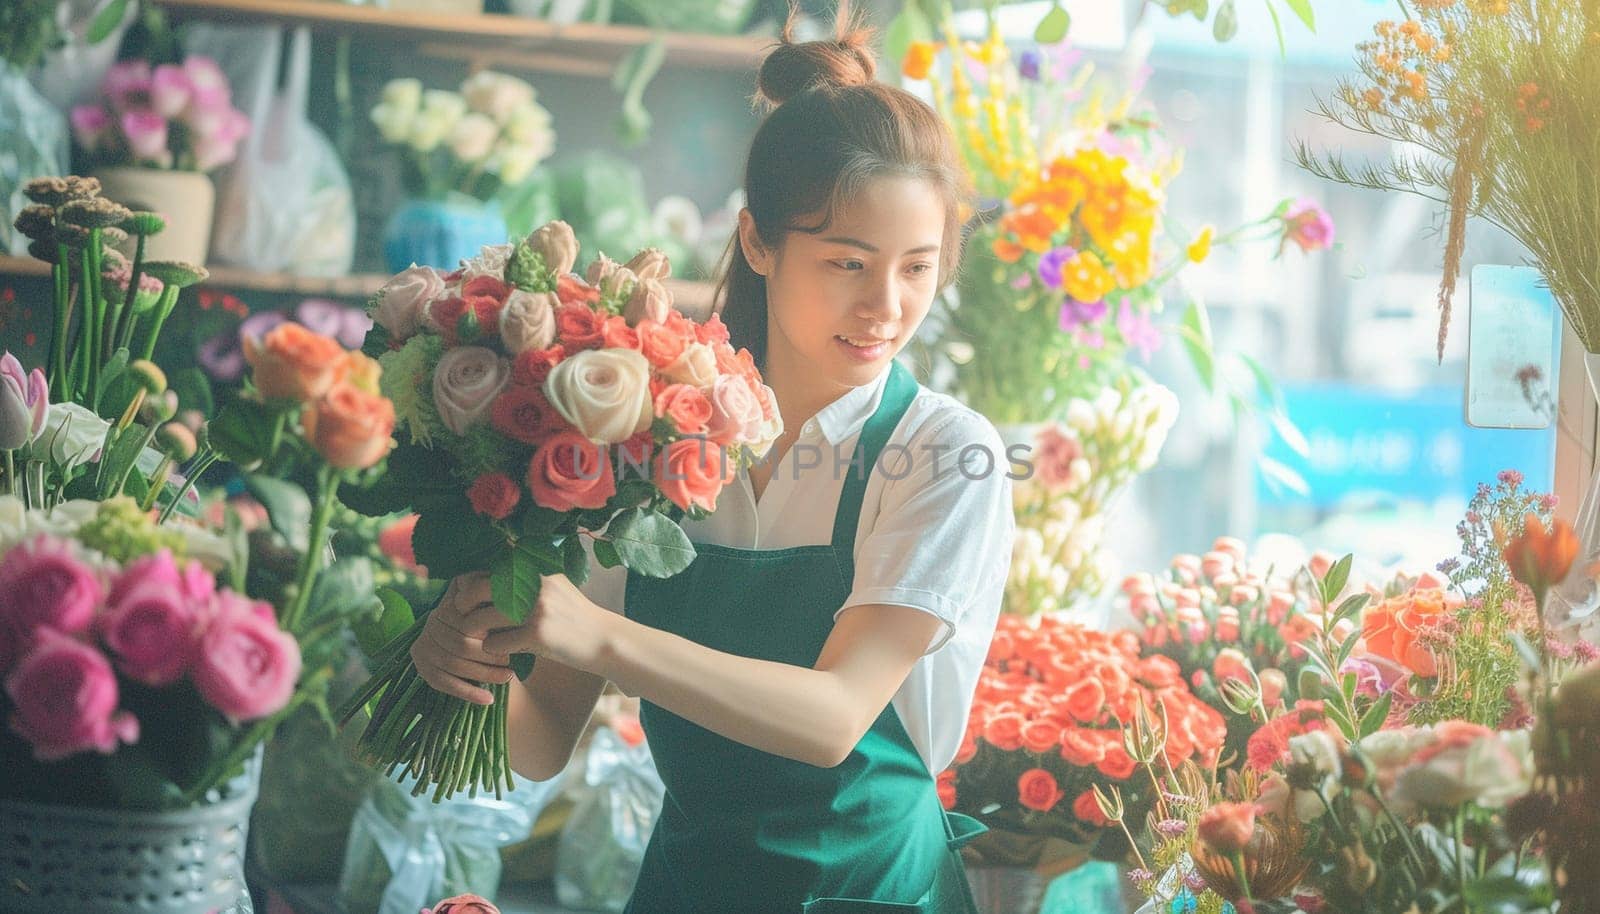 A florist girl holds a bouquet of flowers by NeuroSky